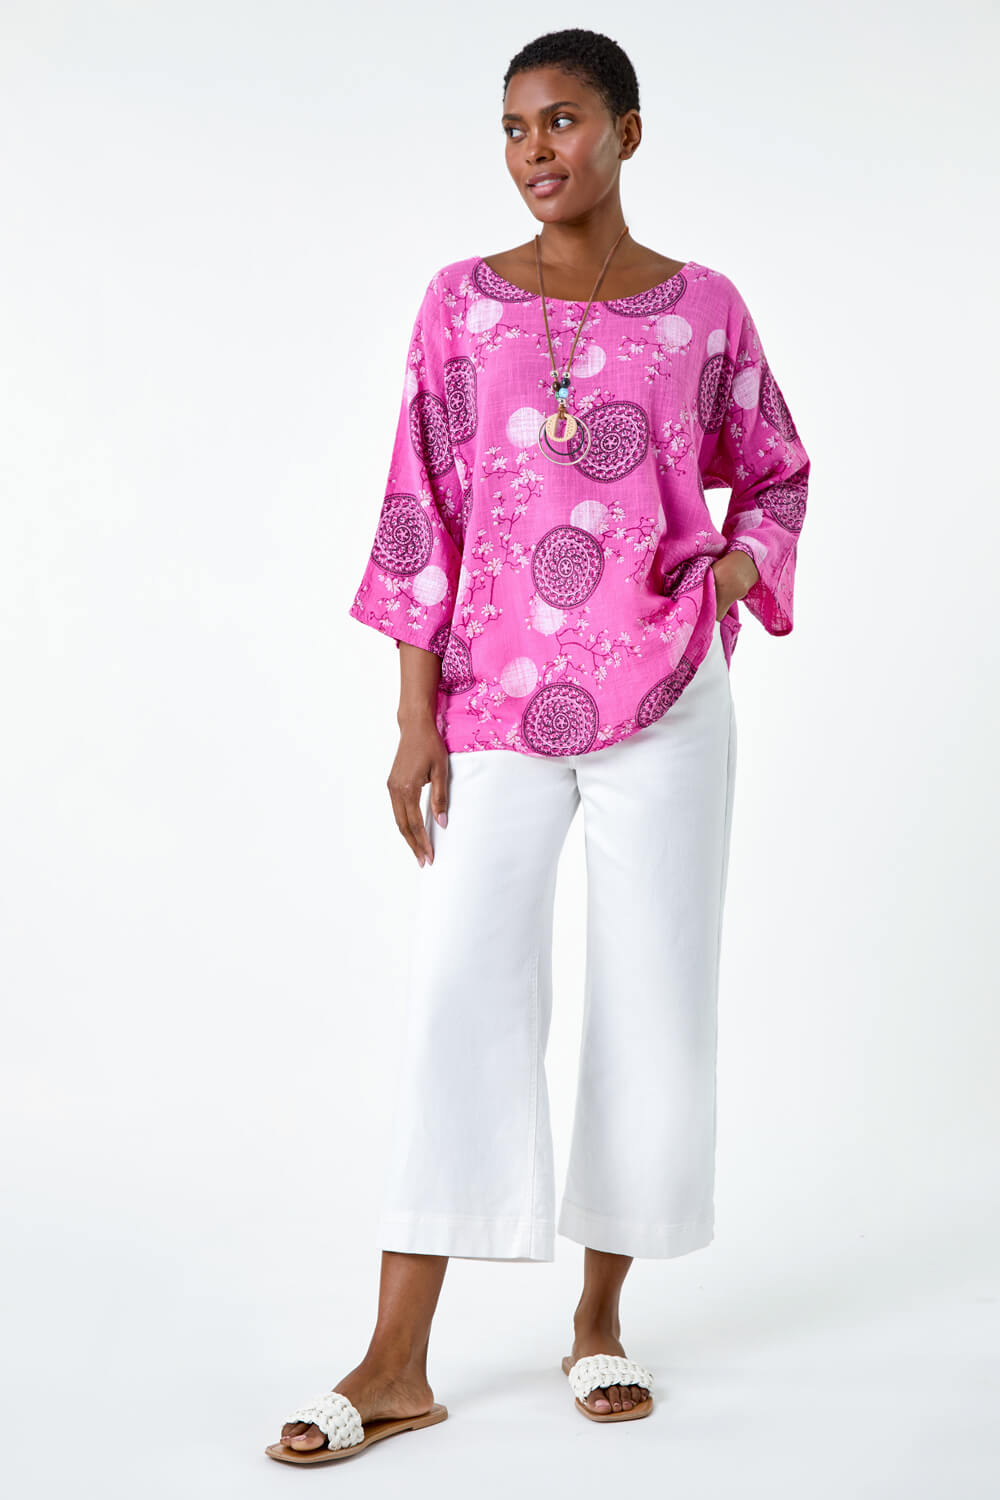 PINK Floral Embroidered Cotton Top with Necklace, Image 3 of 5